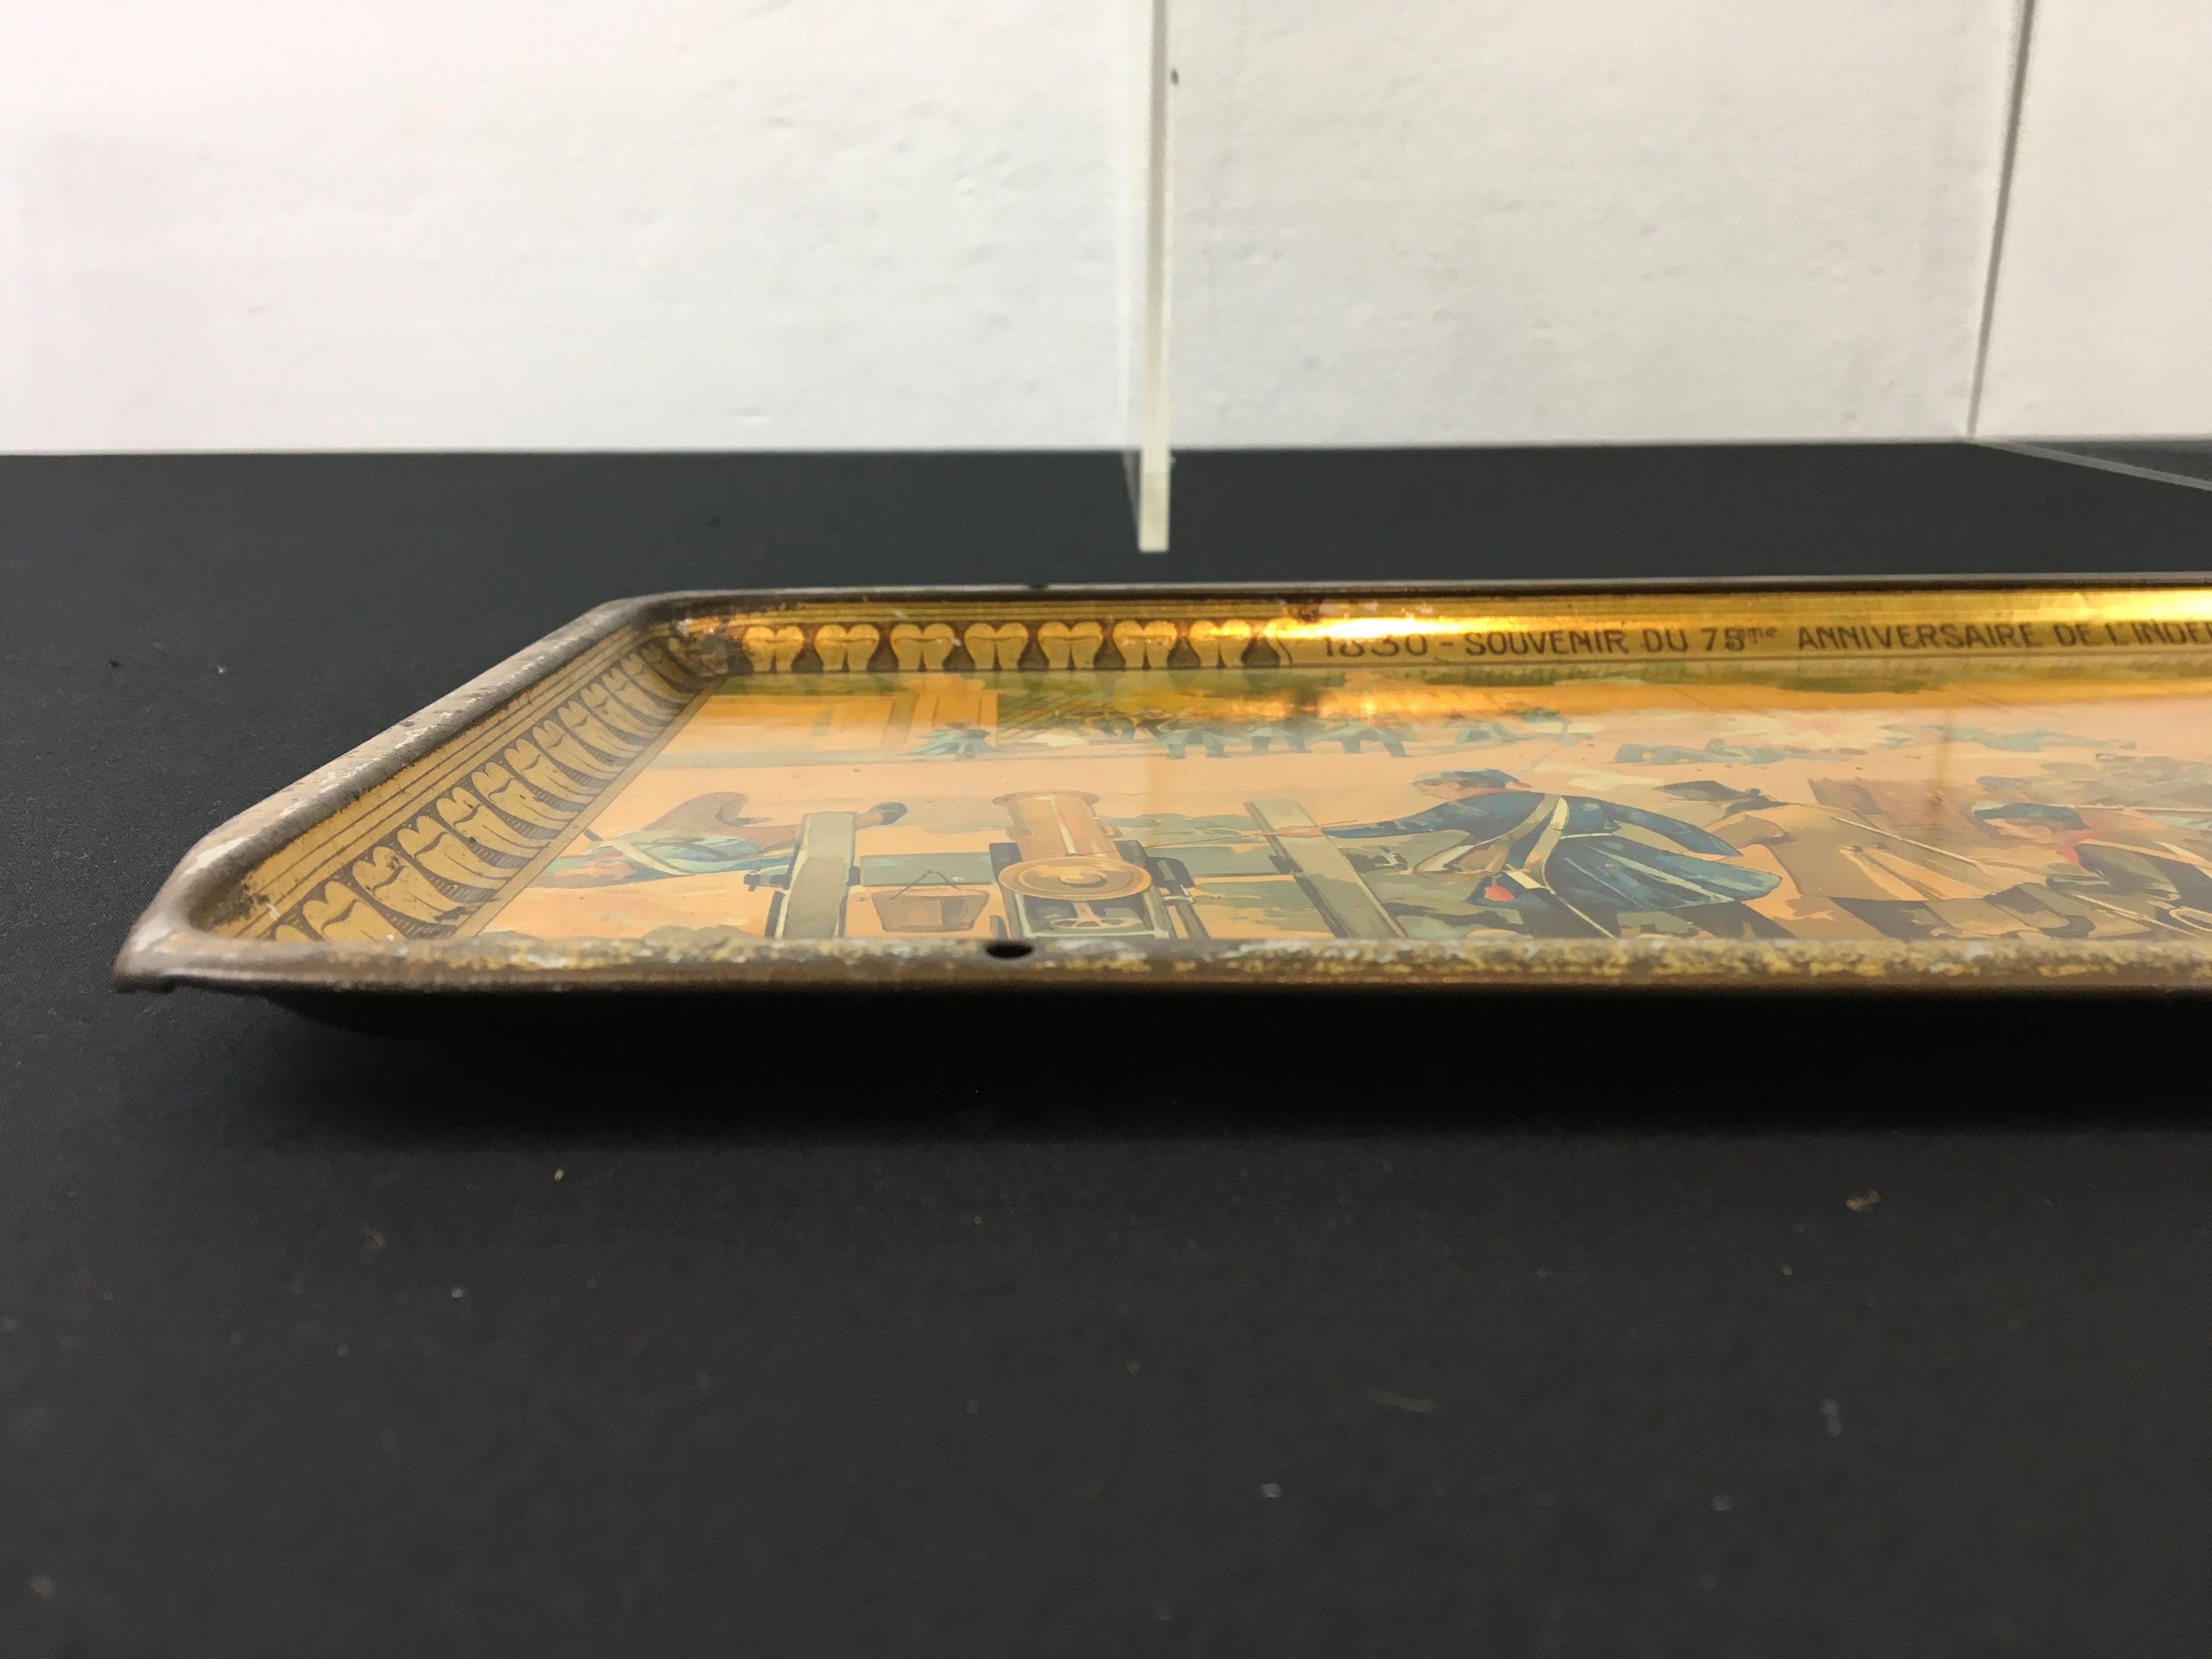 Antique Tray Chocolate Michiels- 1905 - 75 years Independence Belgium For Sale 6